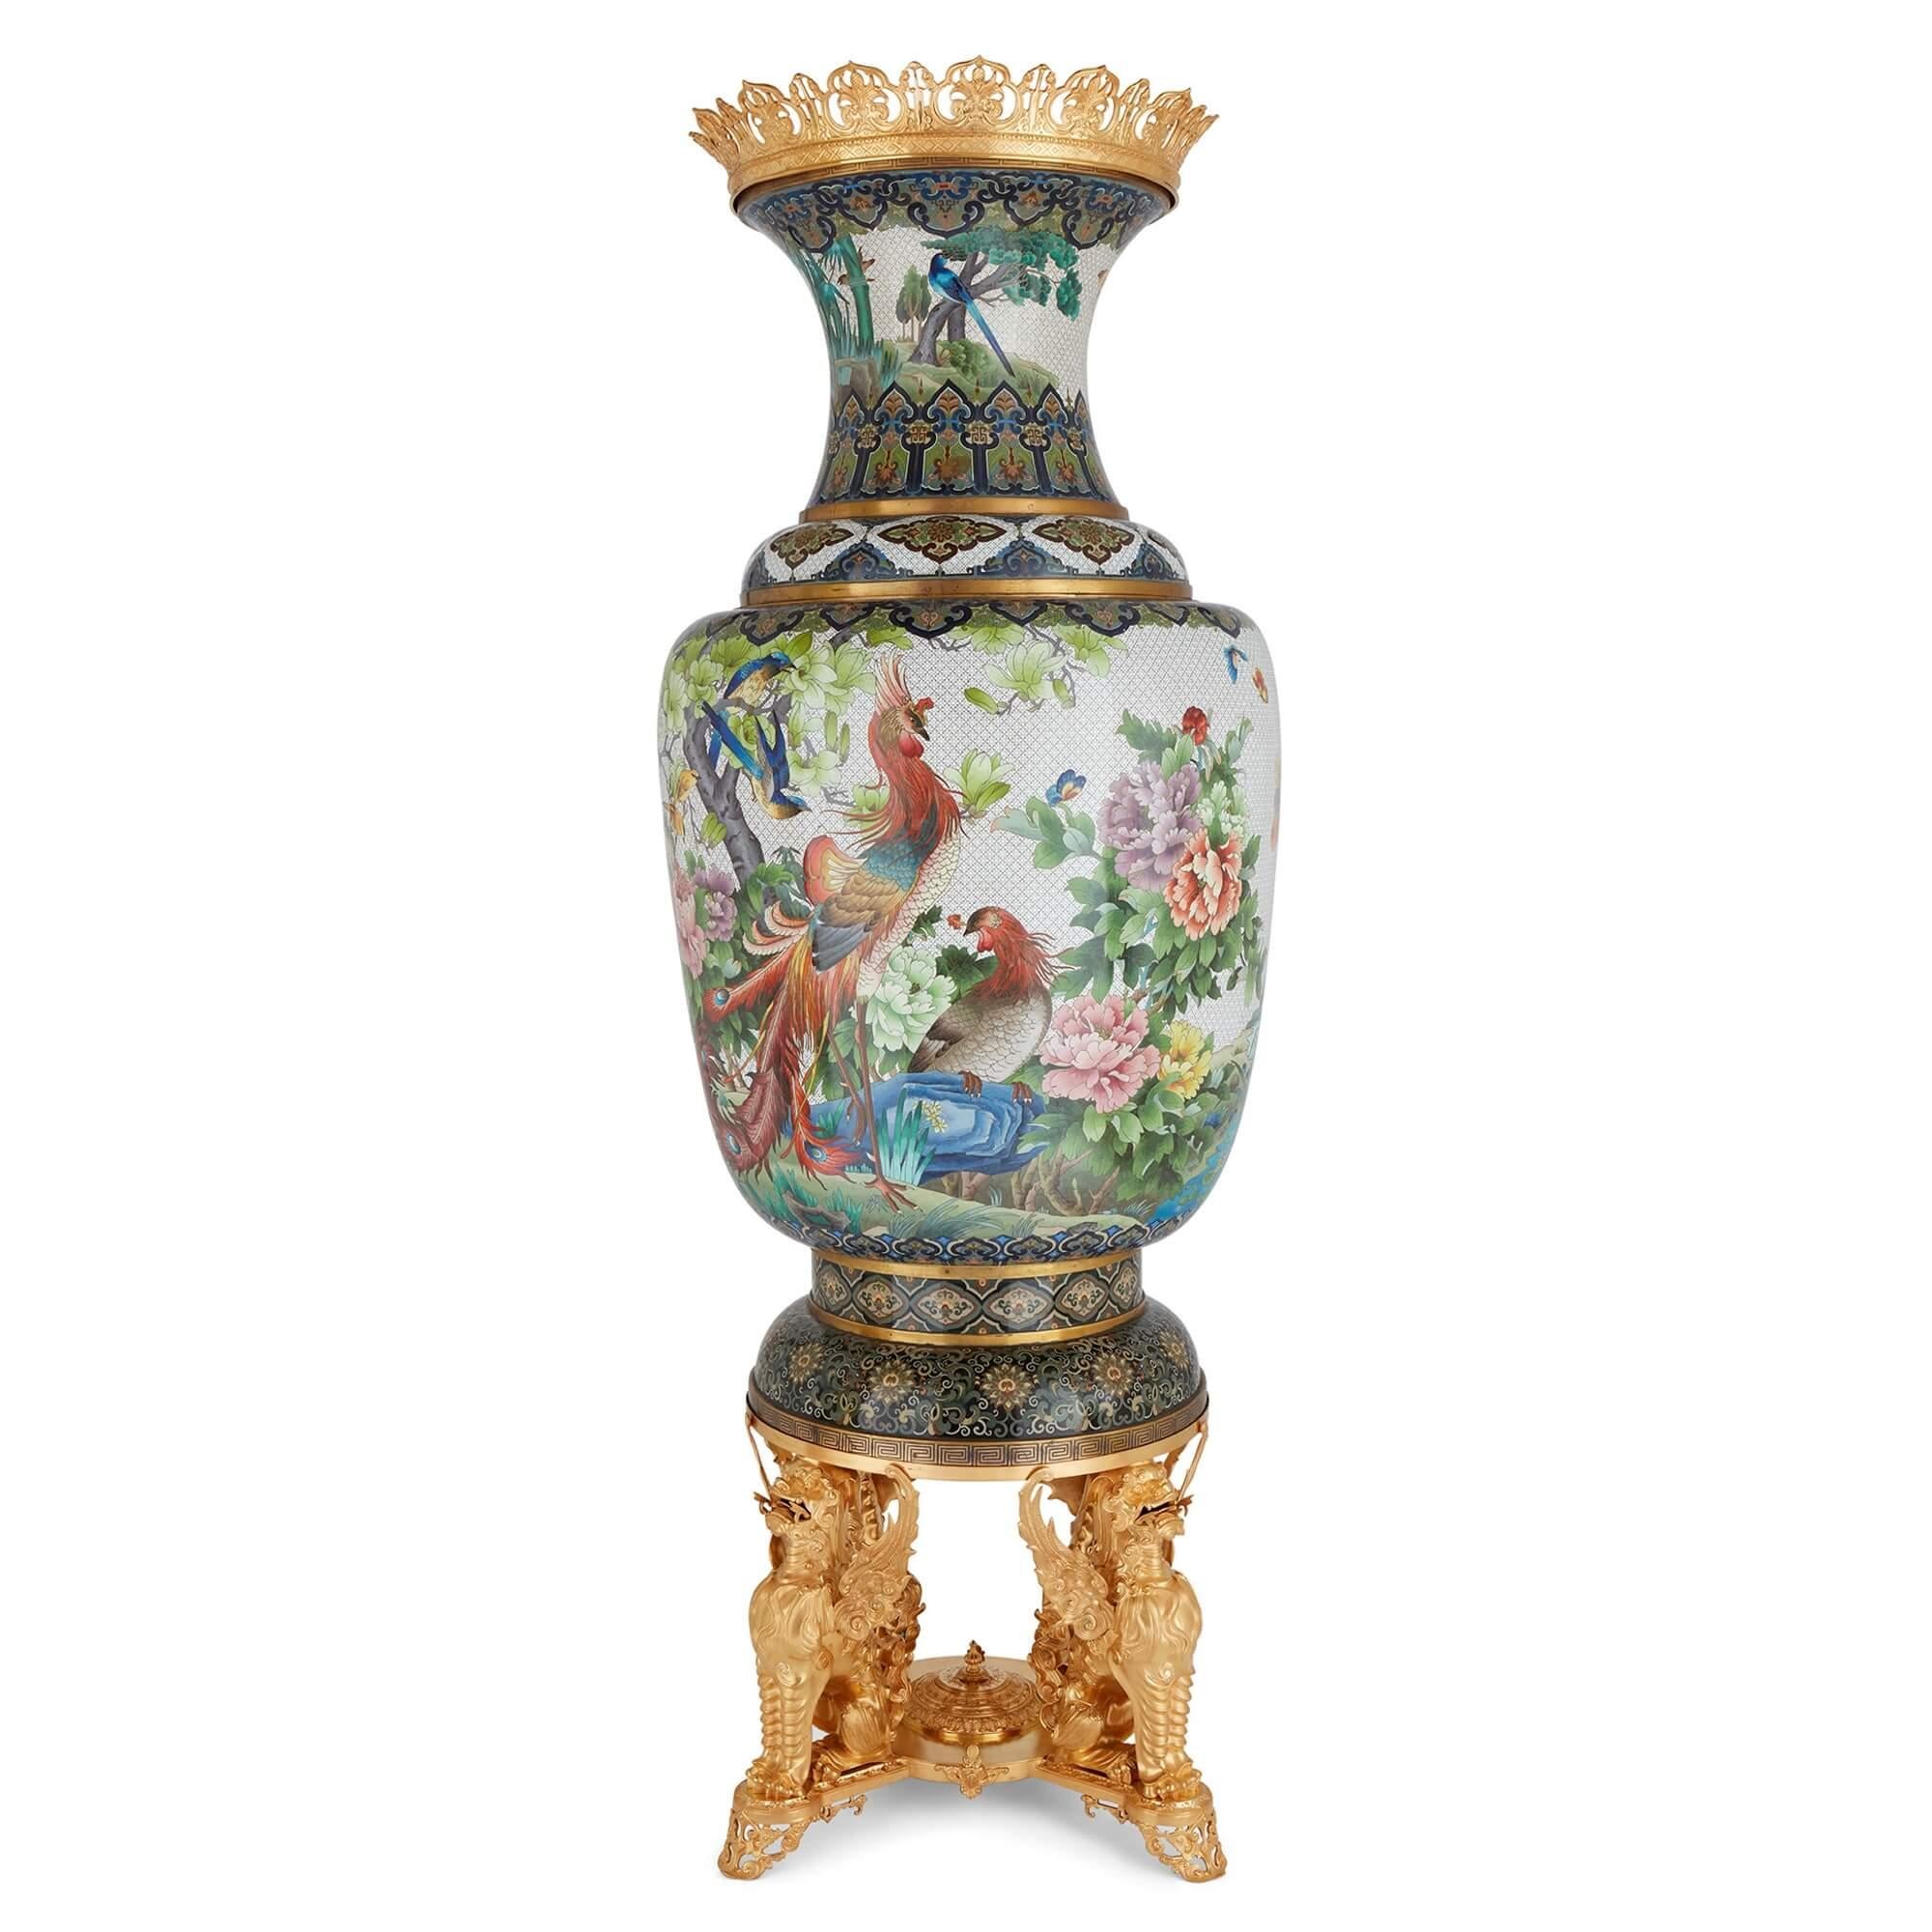 Pair of very large Chinese cloisonné enamel vases with French ormolu mounts 
Chinese and French, 20th century 
Height 215cm, diameter 78cm

These superb vases bring together exceptional Chinese enamelling with ornate French ormolu mounts, combining